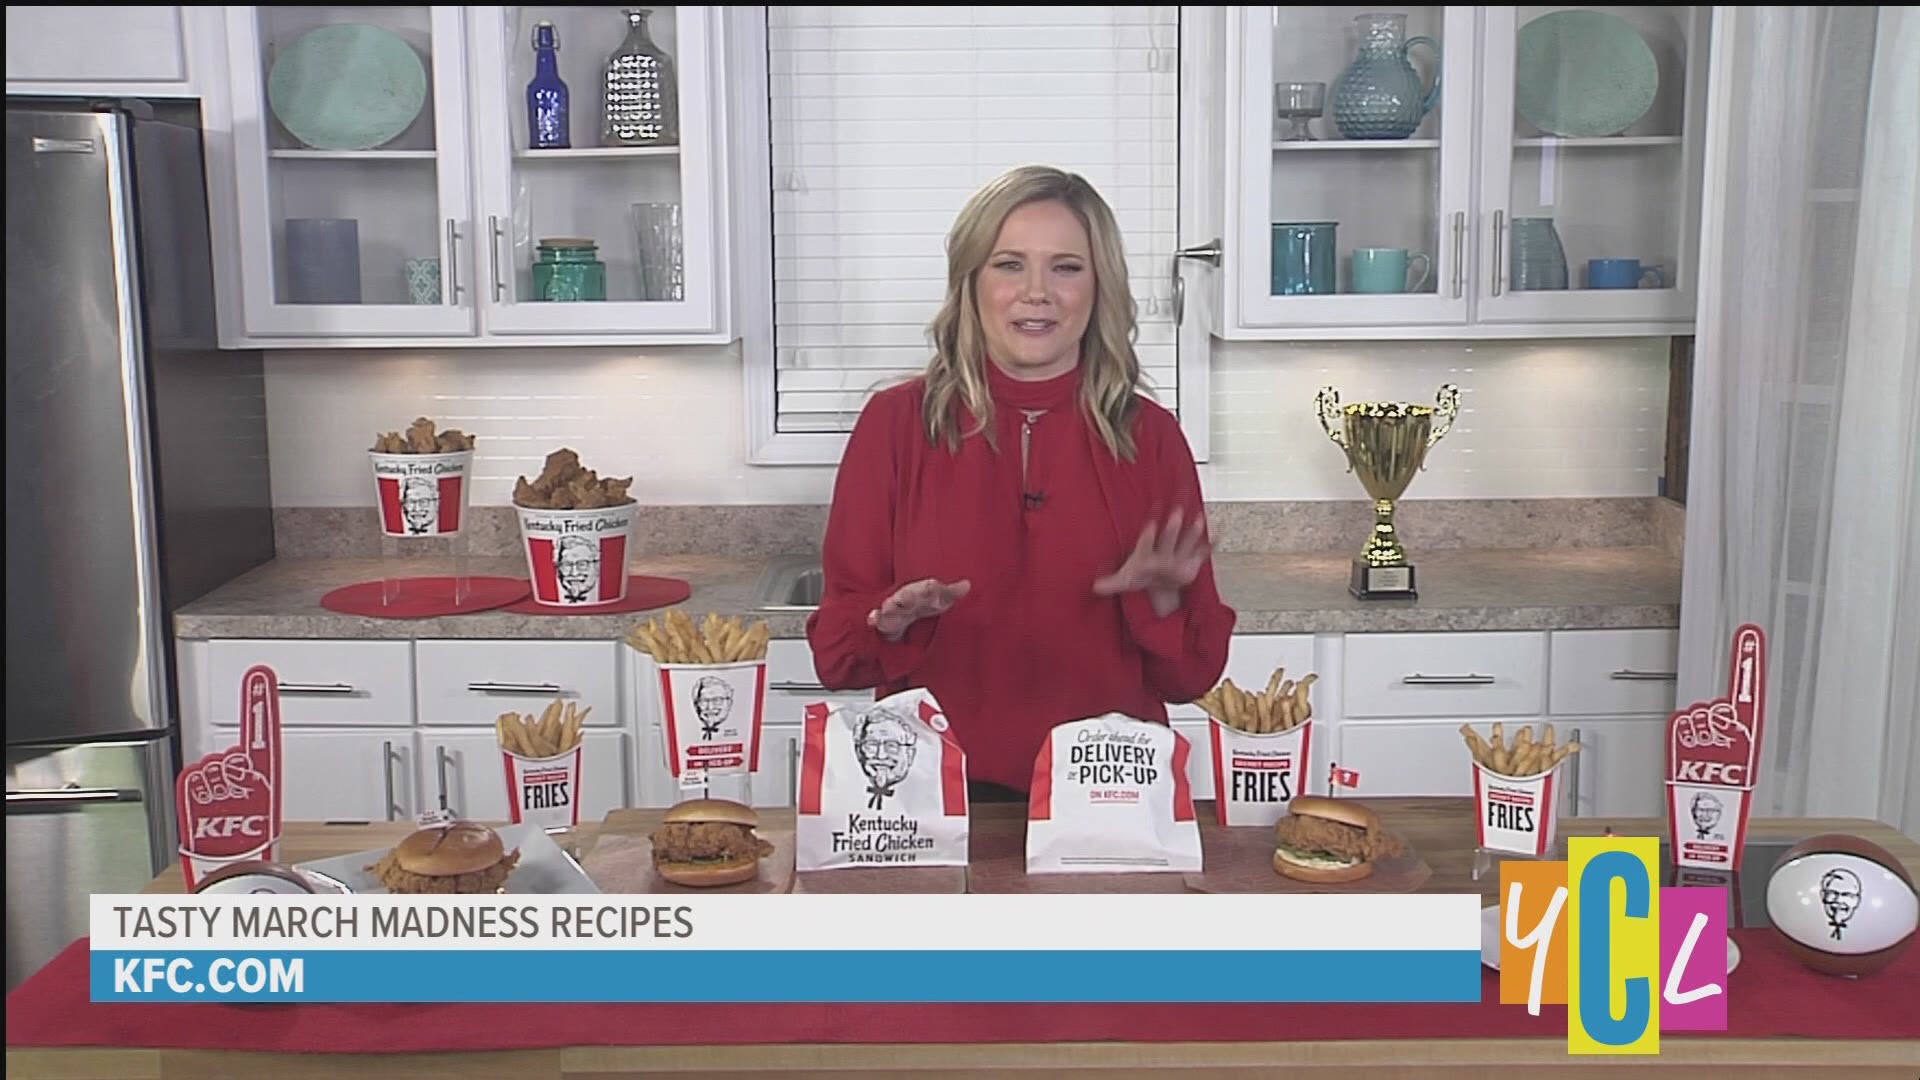 Former ESPN Sportscaster, Jaymee Sire, shares her picks, tips and menu for the NCAA tournament. 
This segment was paid for by Kentucky Fried Chicken.